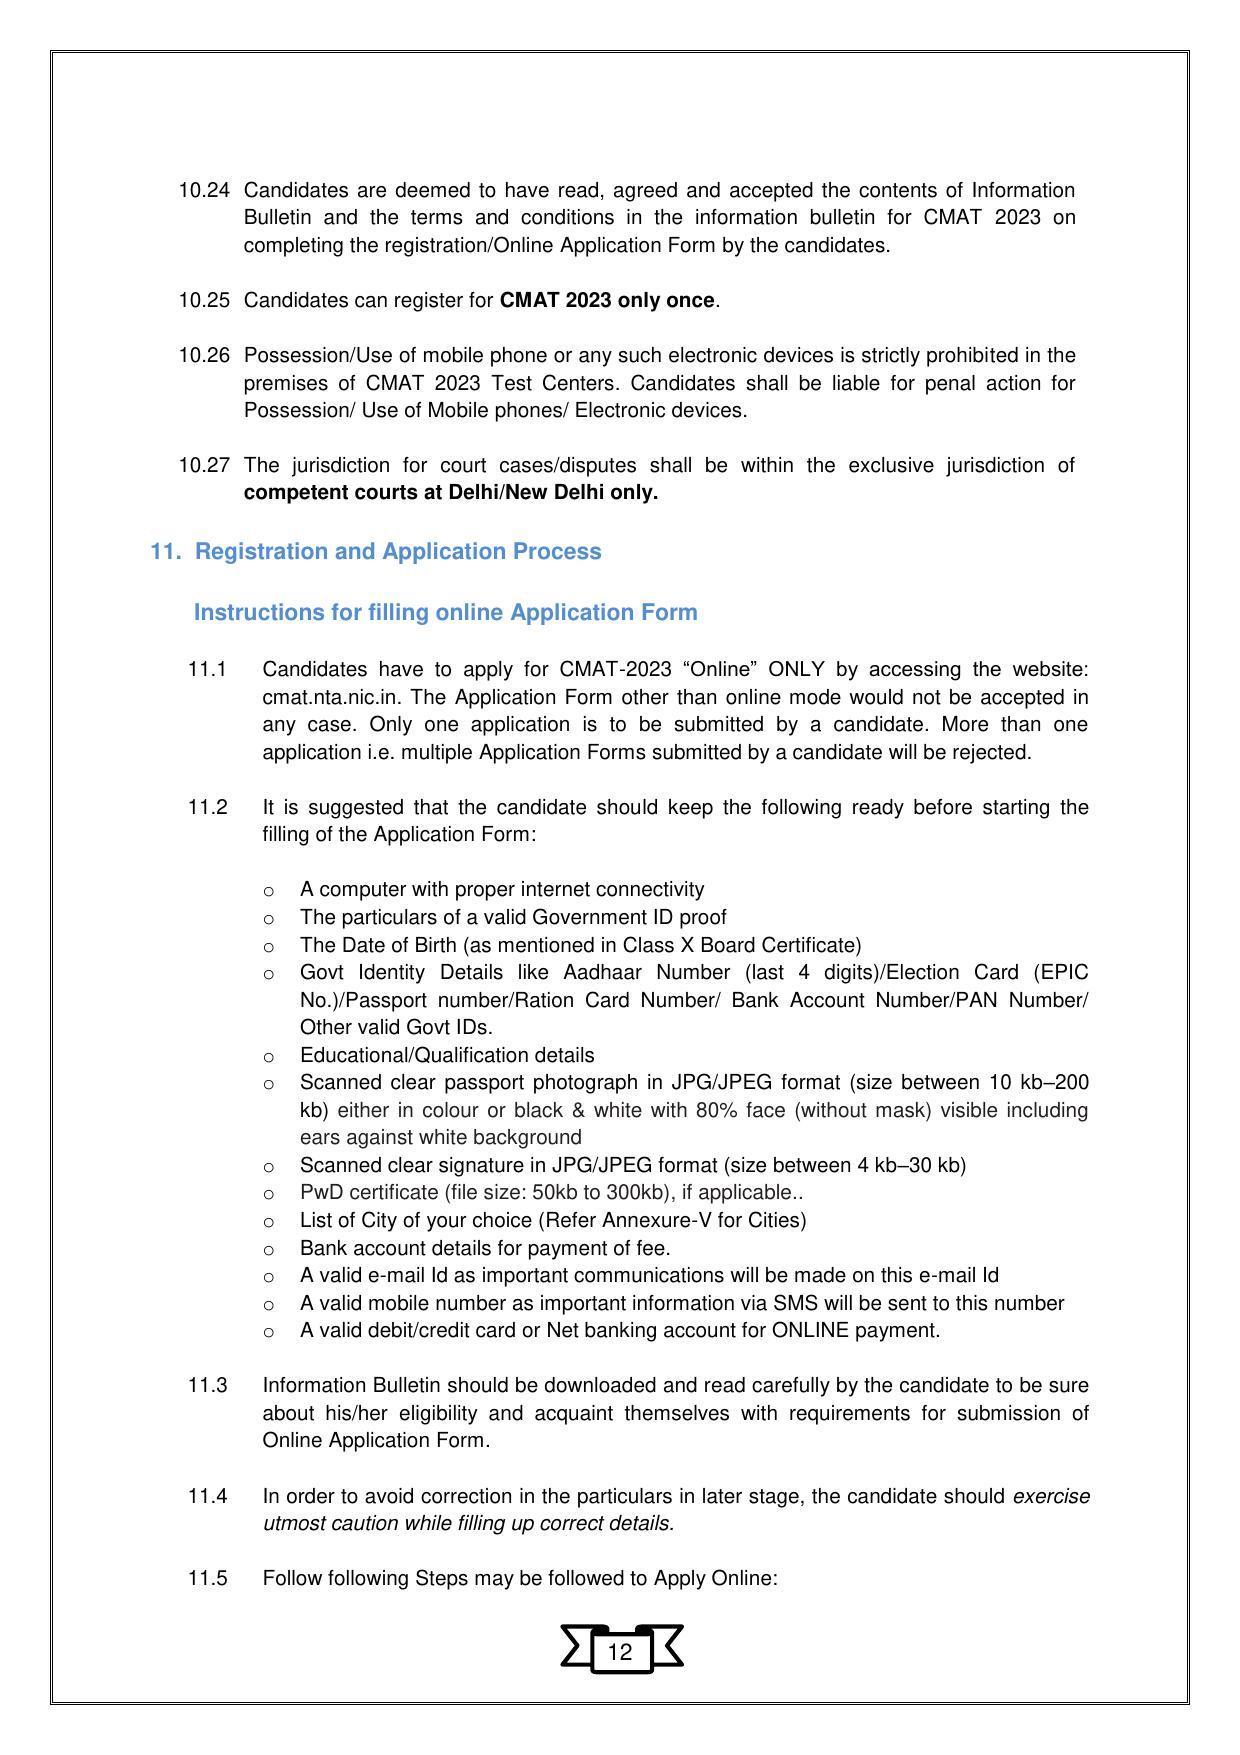 CMAT 2023 Information Bulletin - Page 15